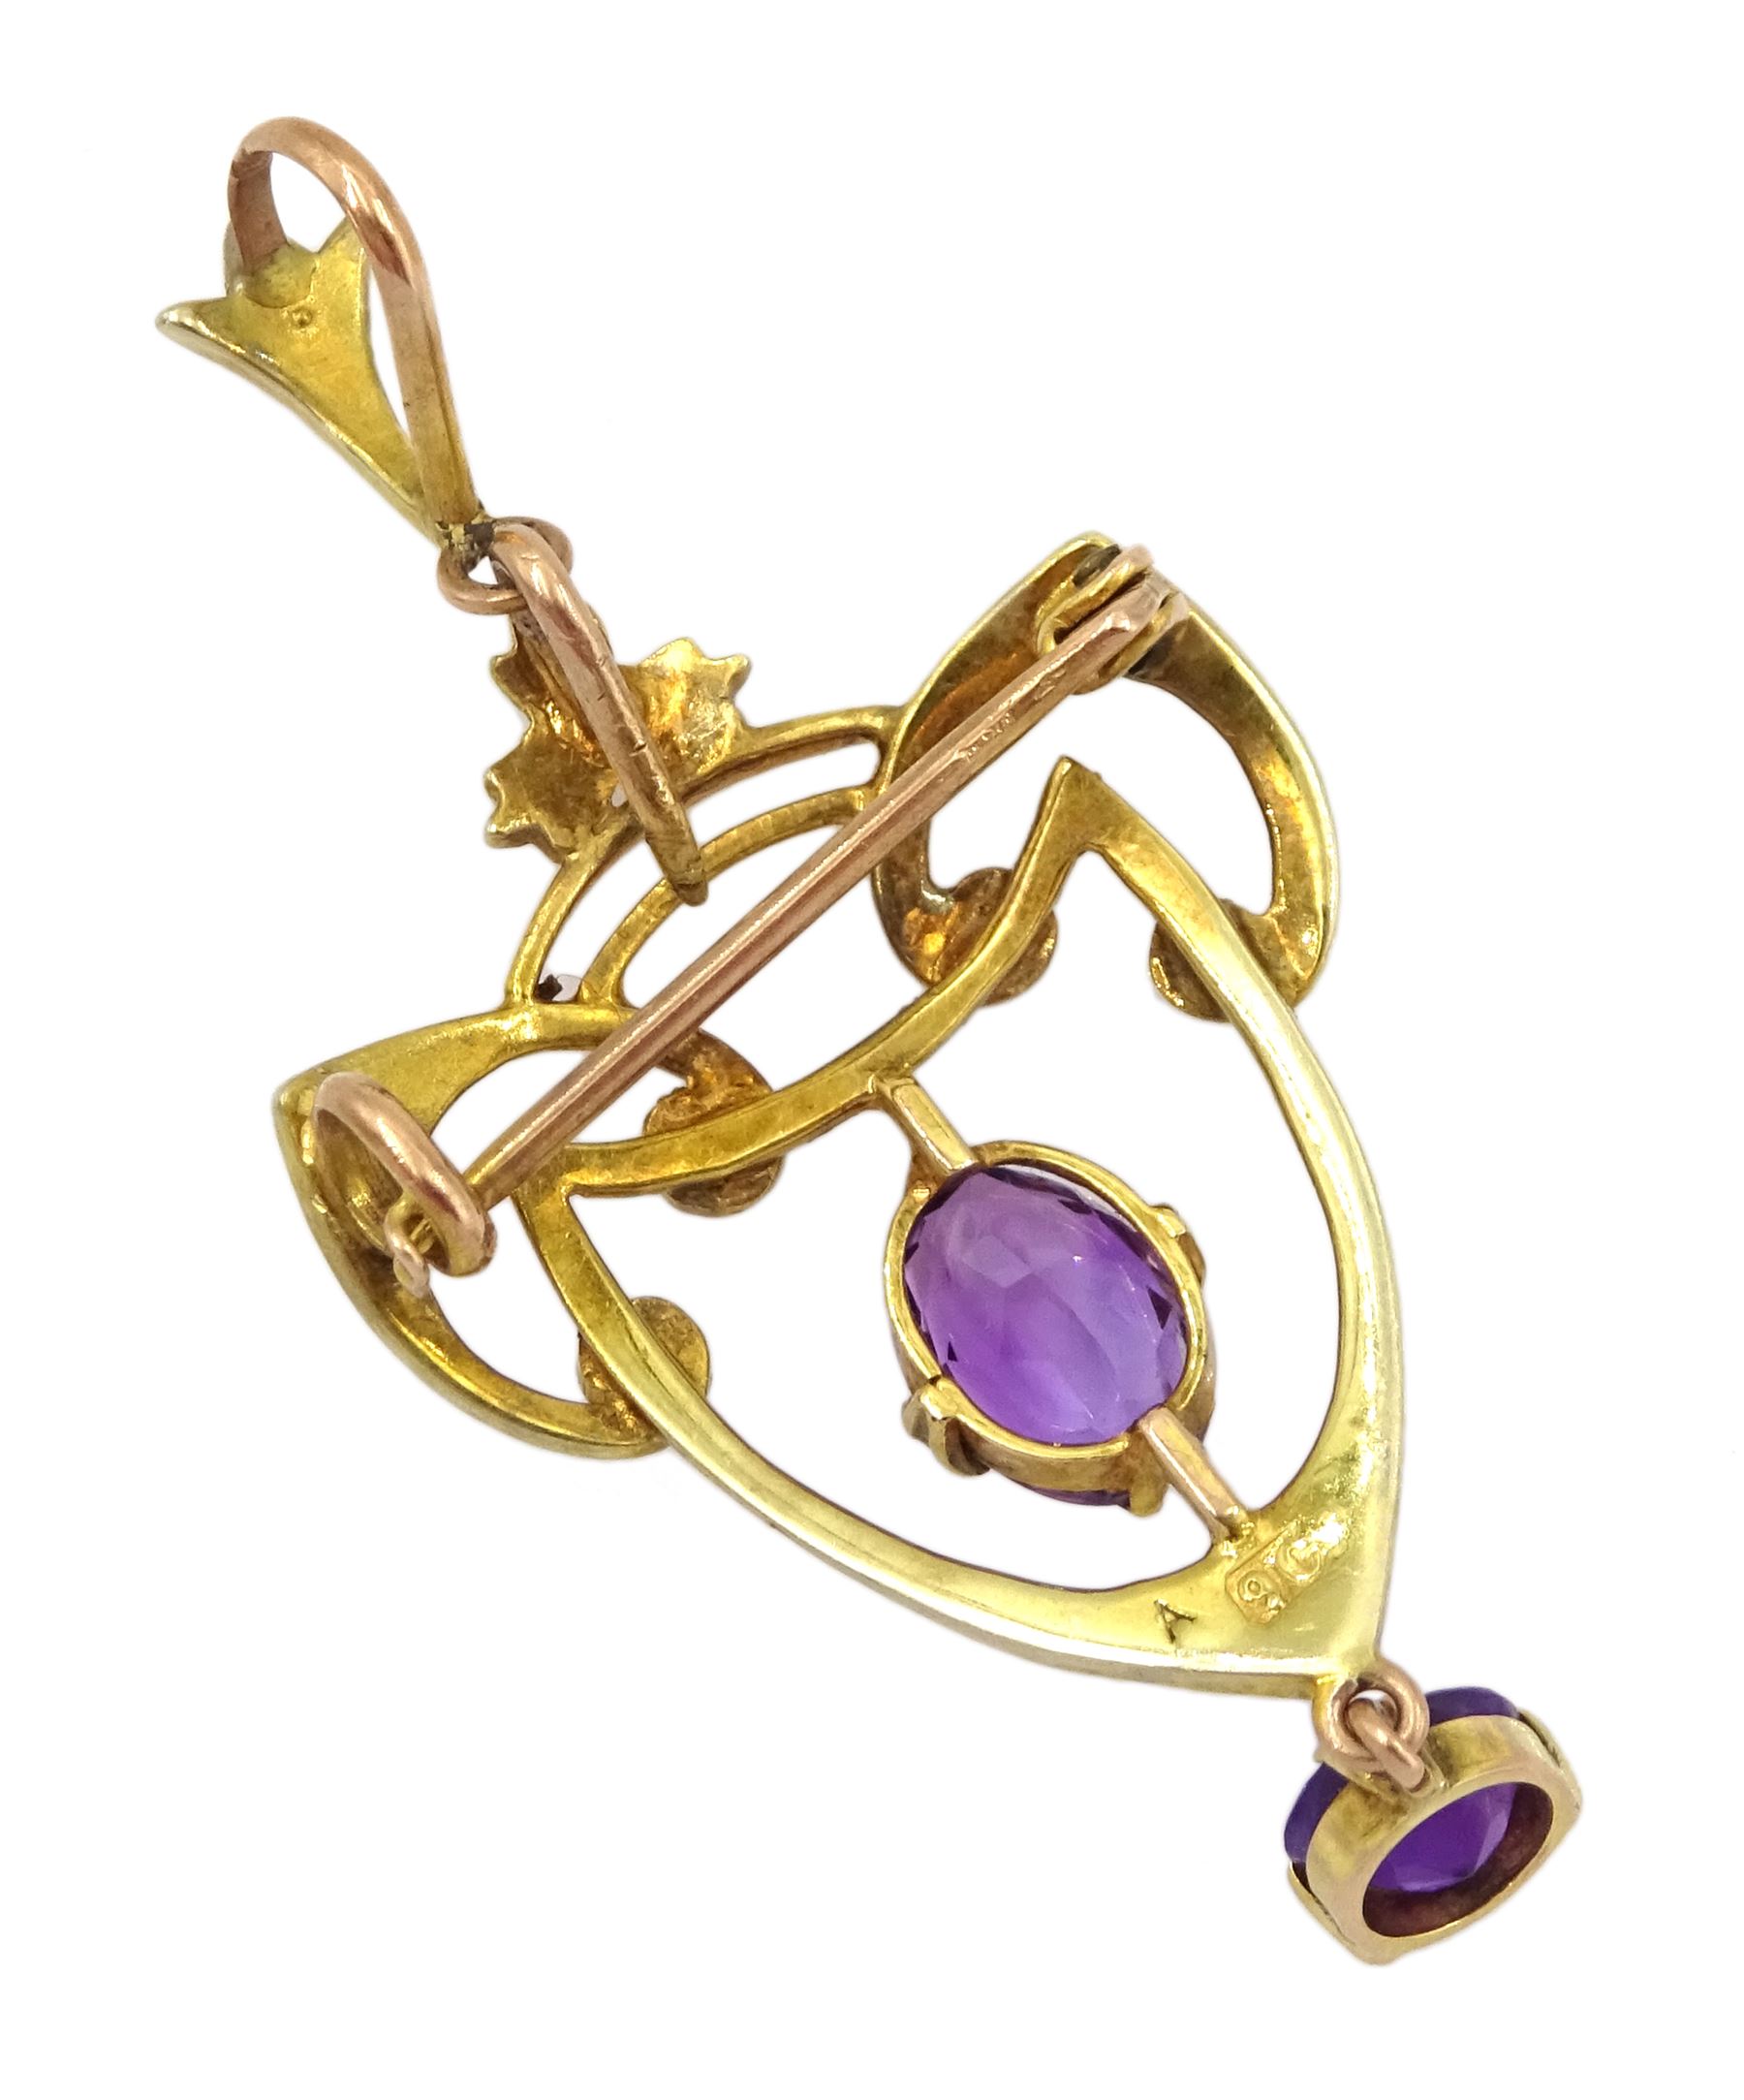 Edwardian gold amethyst and seed pearl pendant/brooch - Image 3 of 3